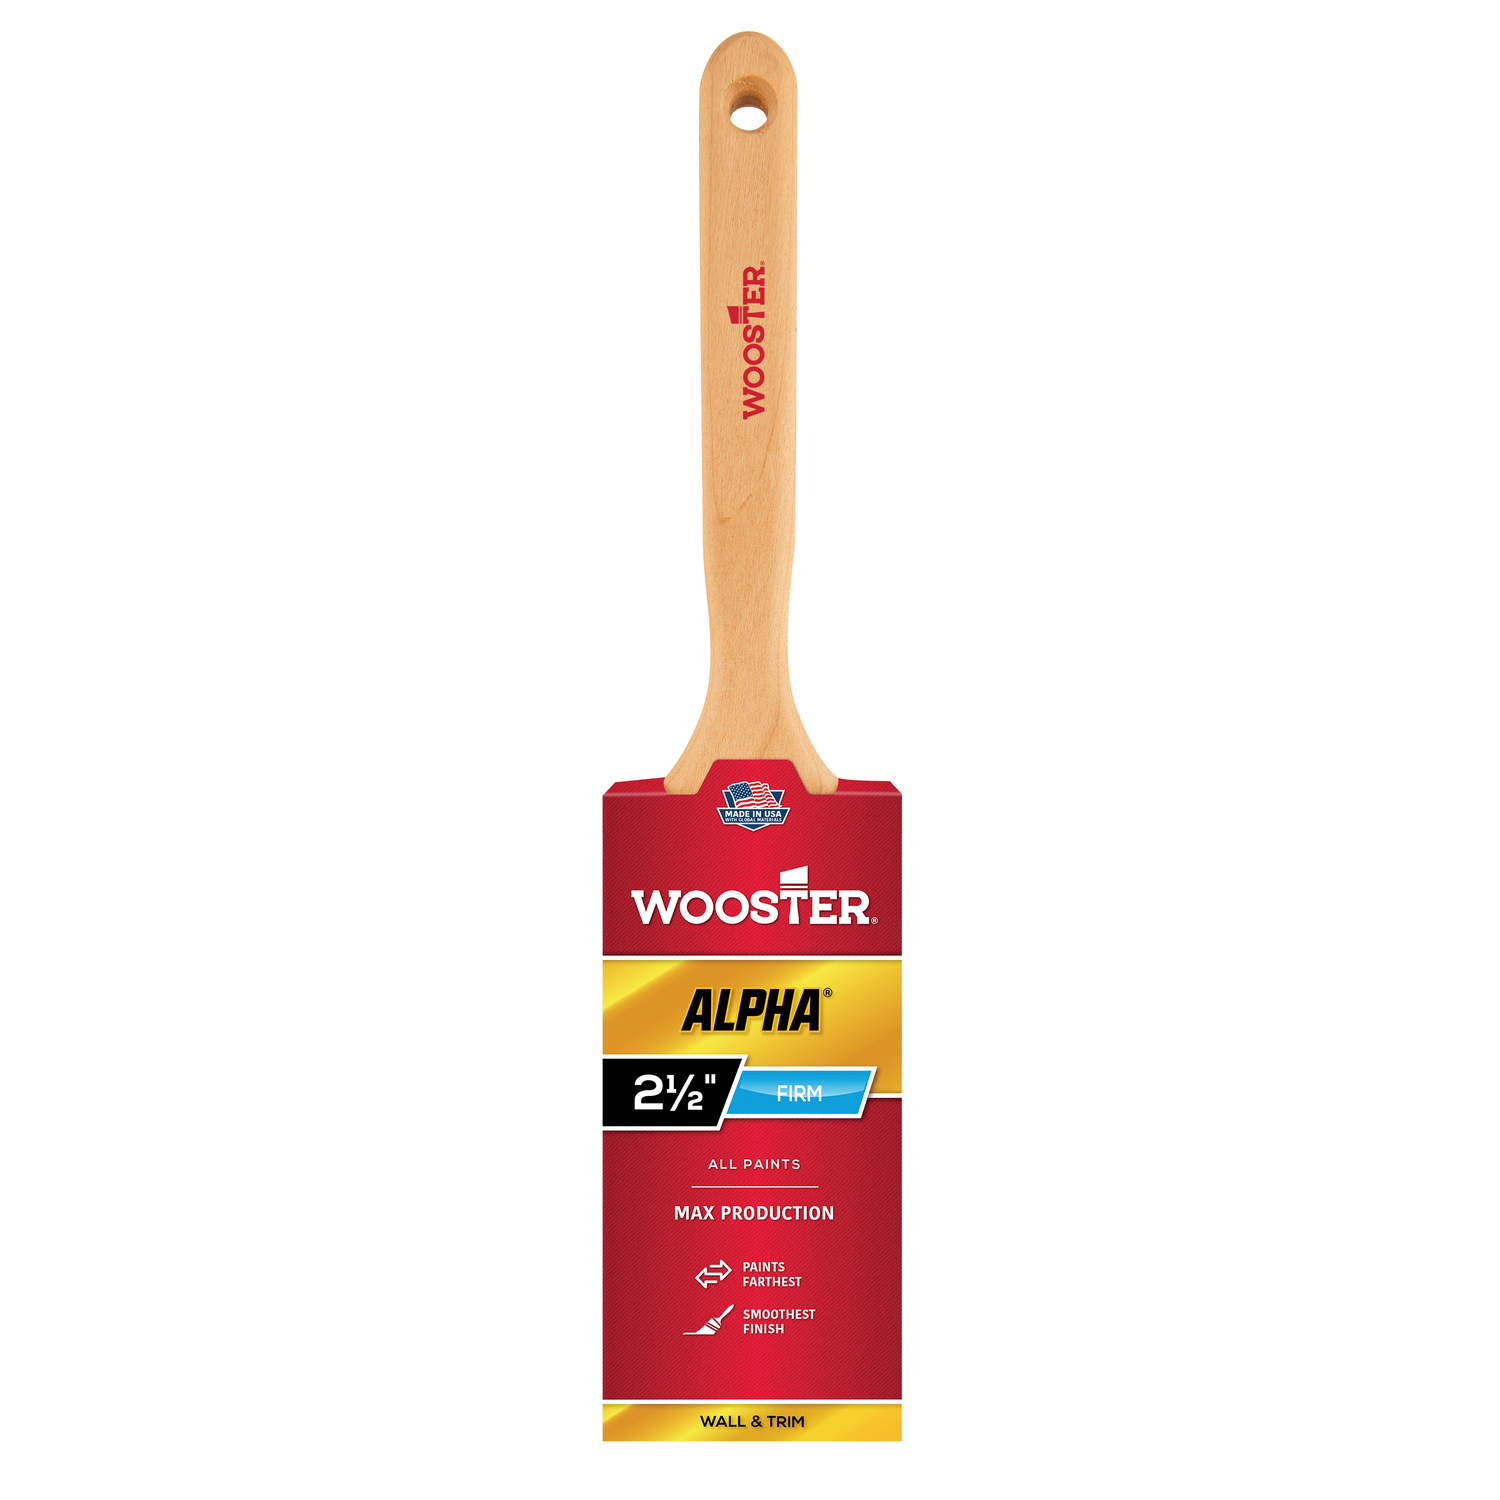 Photos - Putty Knife / Painting Tool Wooster Alpha 2-1/2 in. Flat Paint Brush 4232-2 1/2